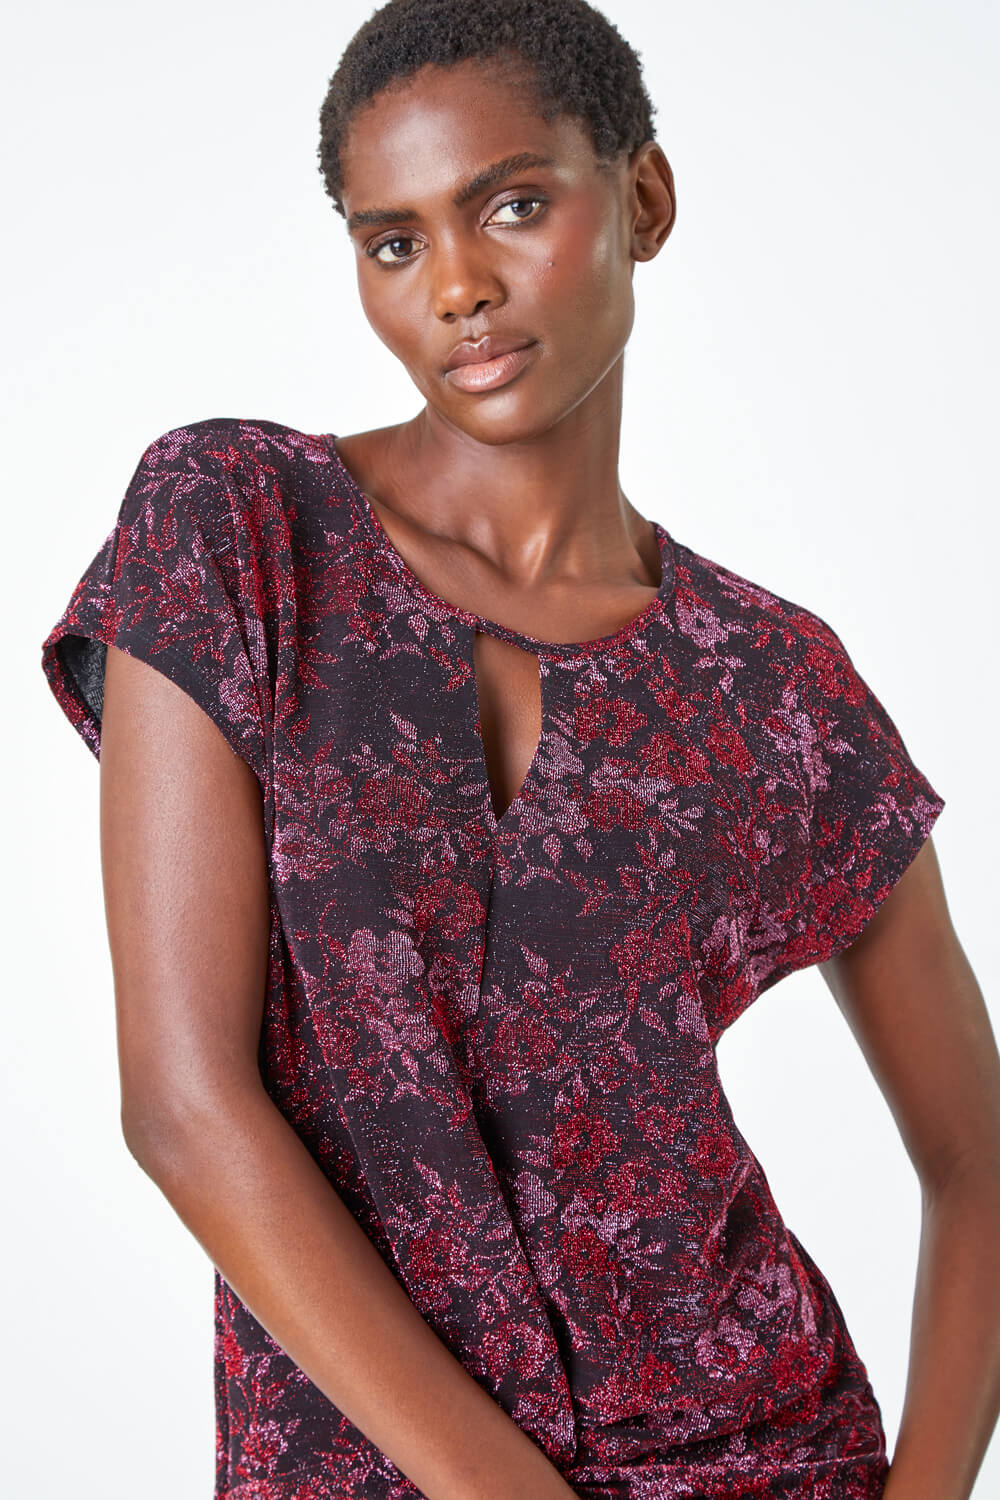 PINK Floral Shimmer Print Knot Stretch Top, Image 5 of 5